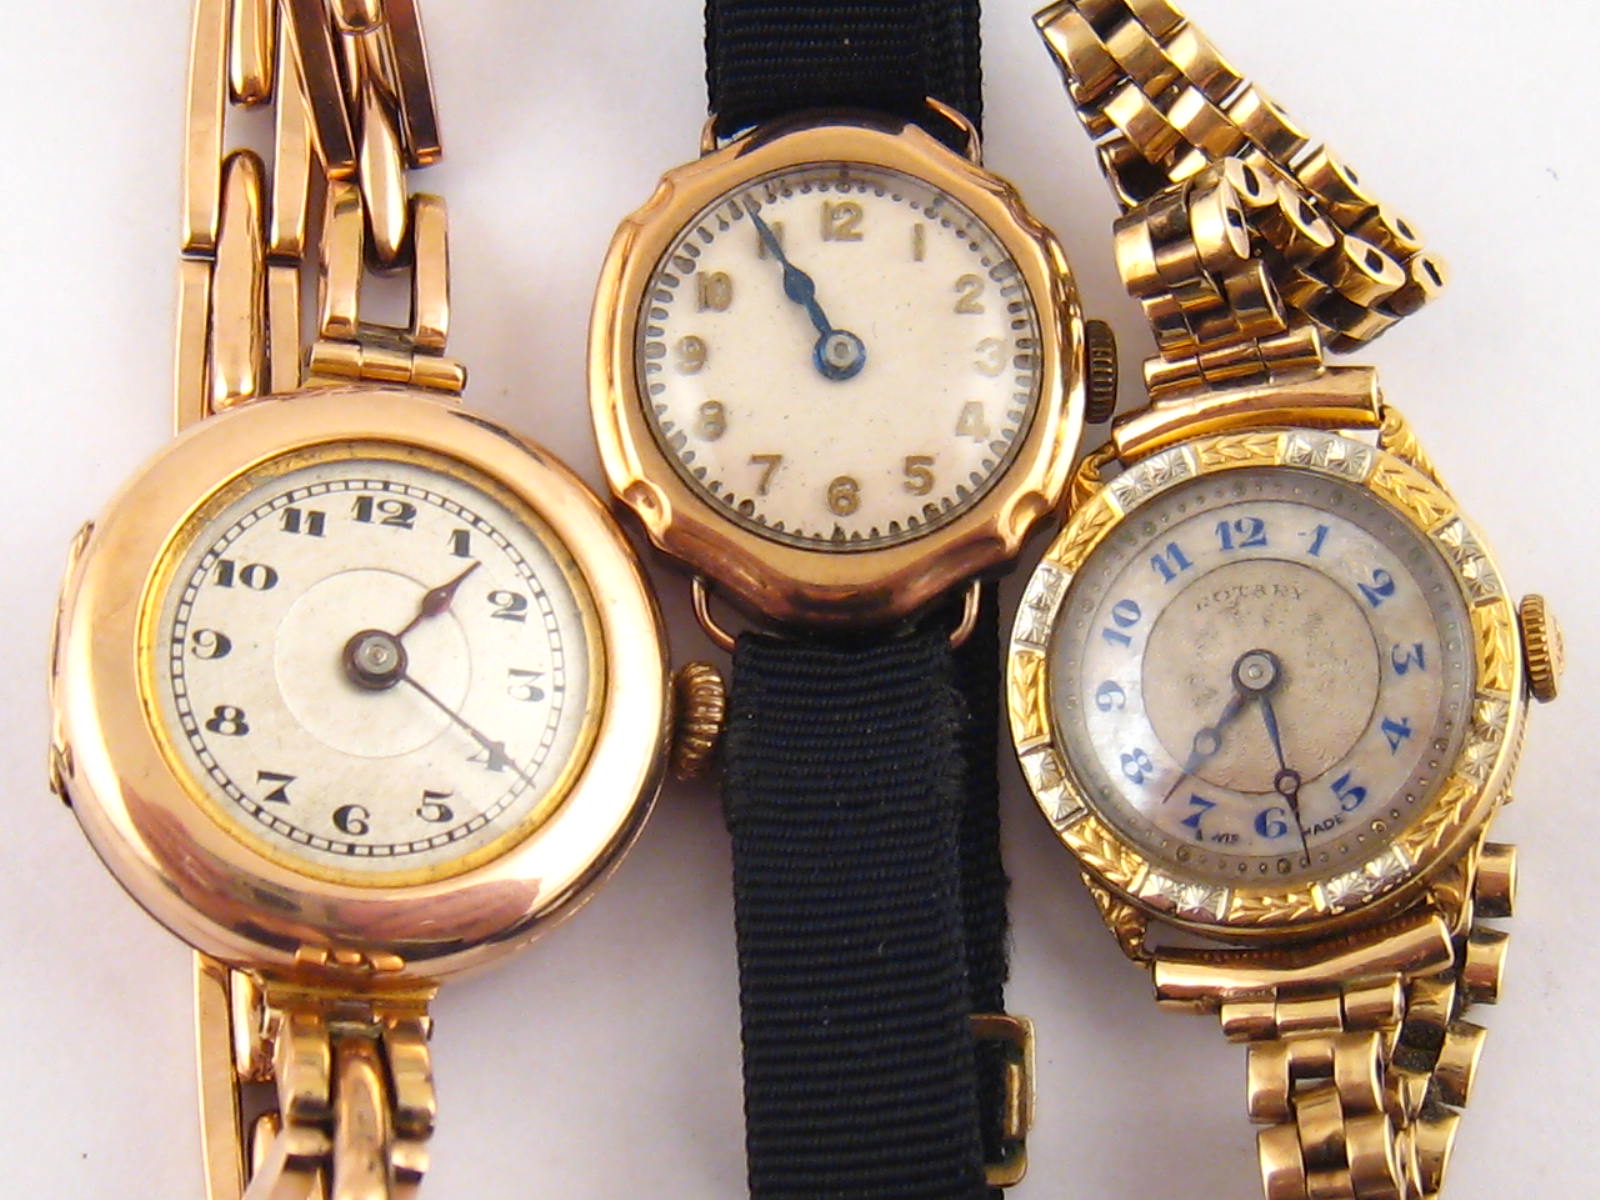 A mixed lot comprising an 18 carat gold lady's wrist watch, circa 1930 with two colour bezel and